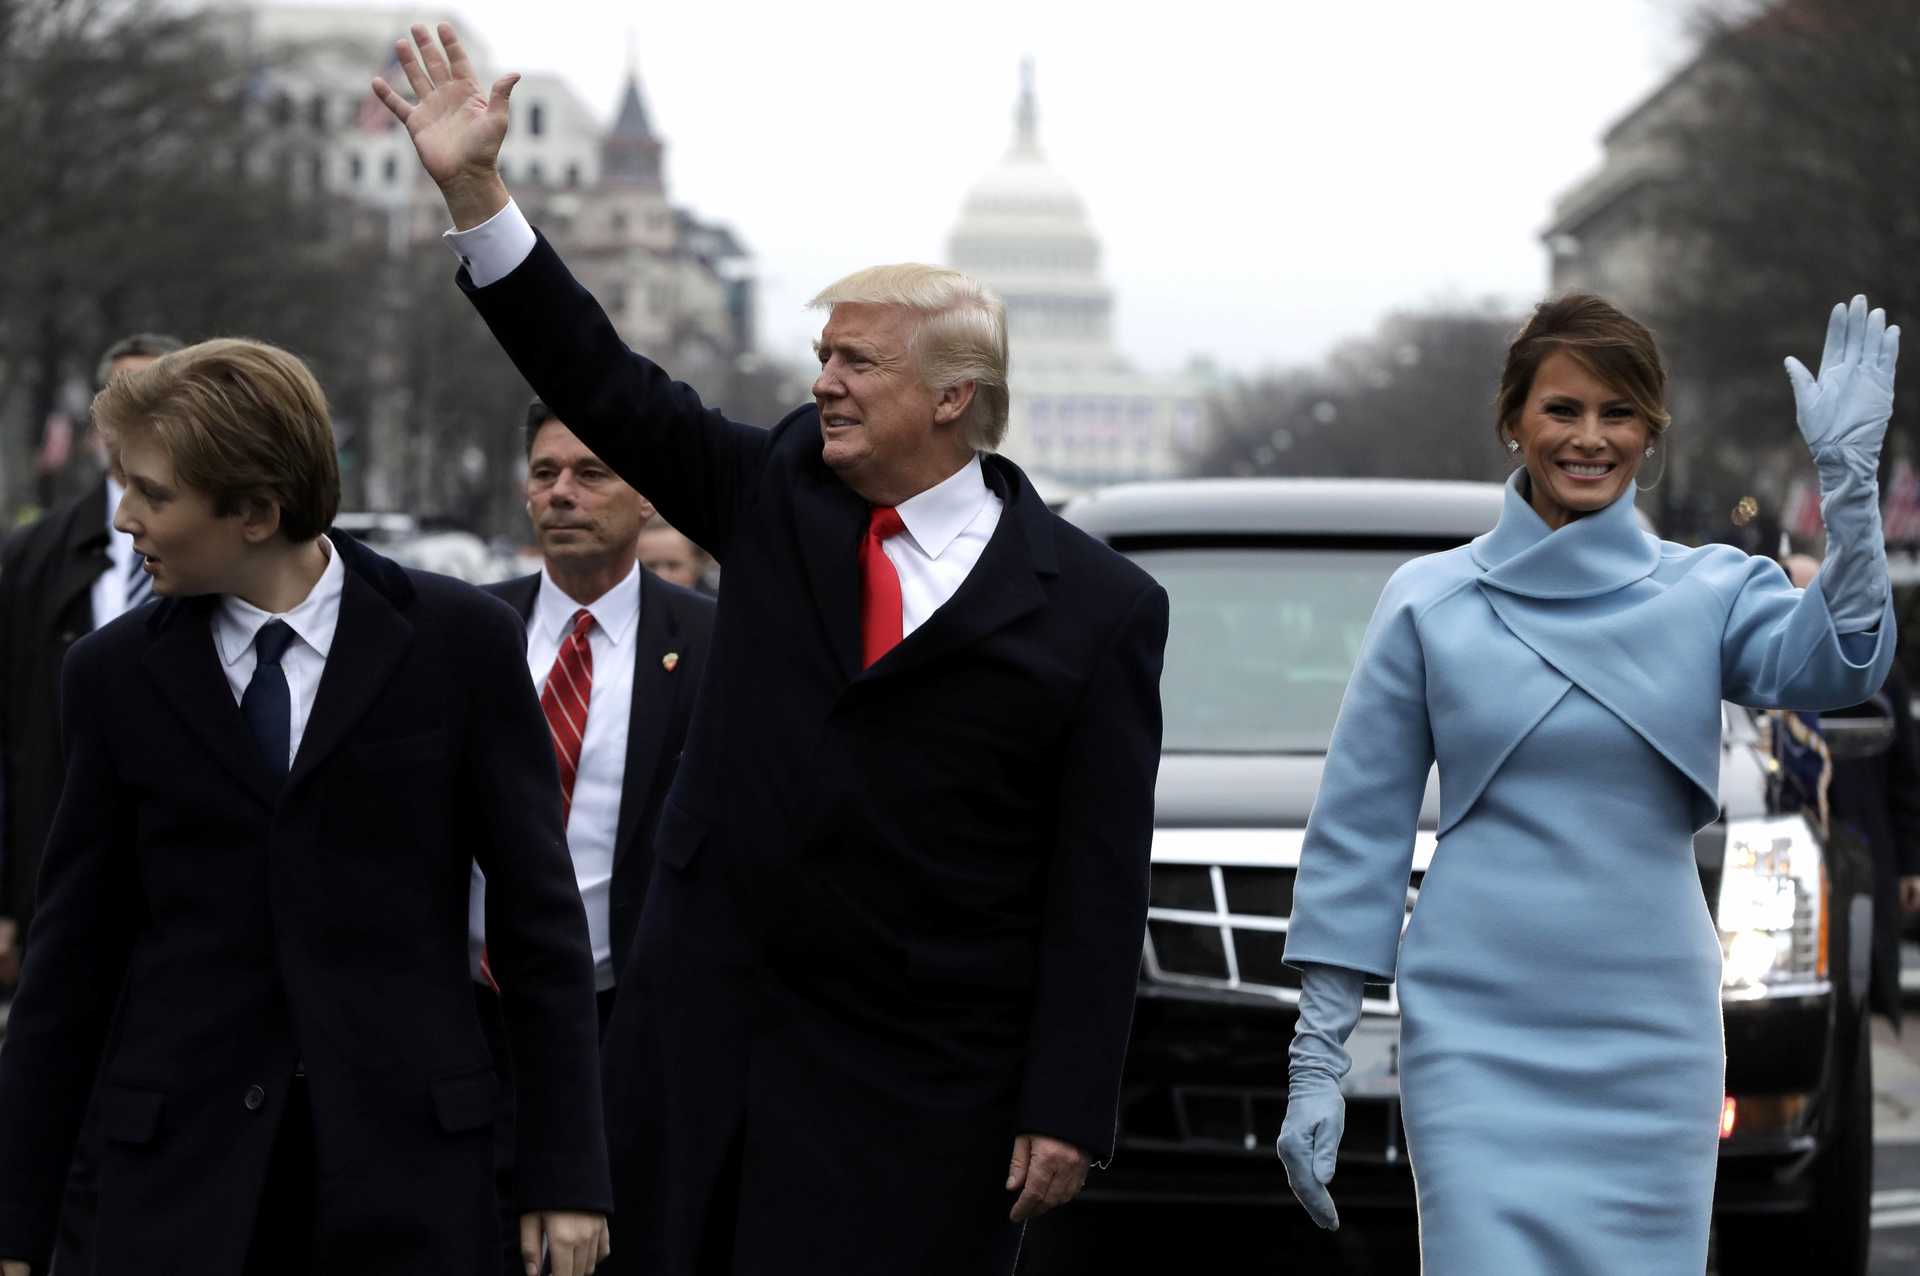 President Donald Trump waves as he walks with first lady Melania Trump in Washington